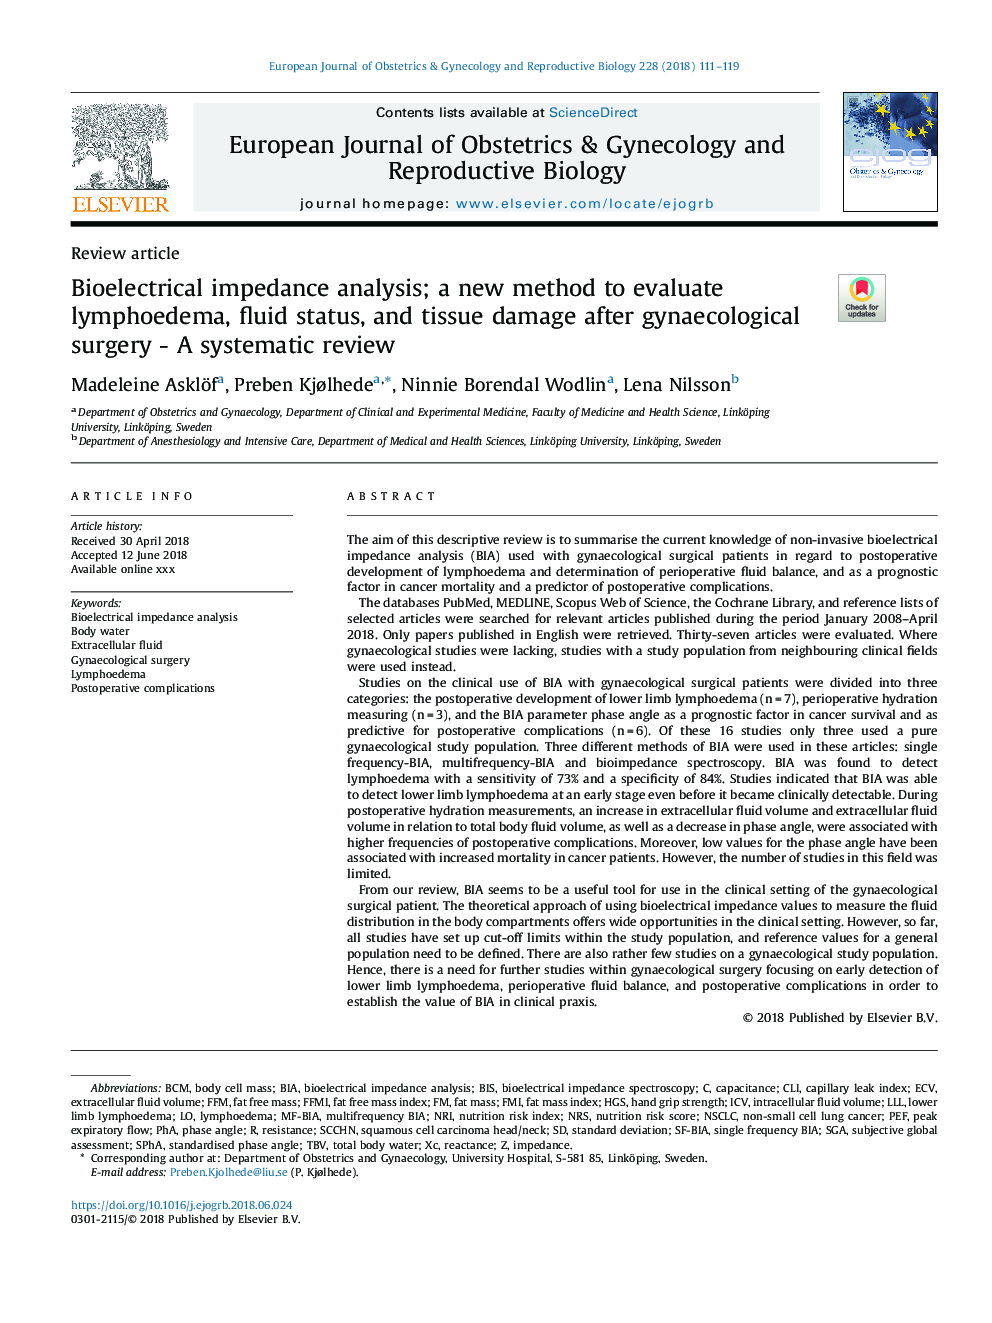 Bioelectrical impedance analysis; a new method to evaluate lymphoedema, fluid status, and tissue damage after gynaecological surgery - A systematic review